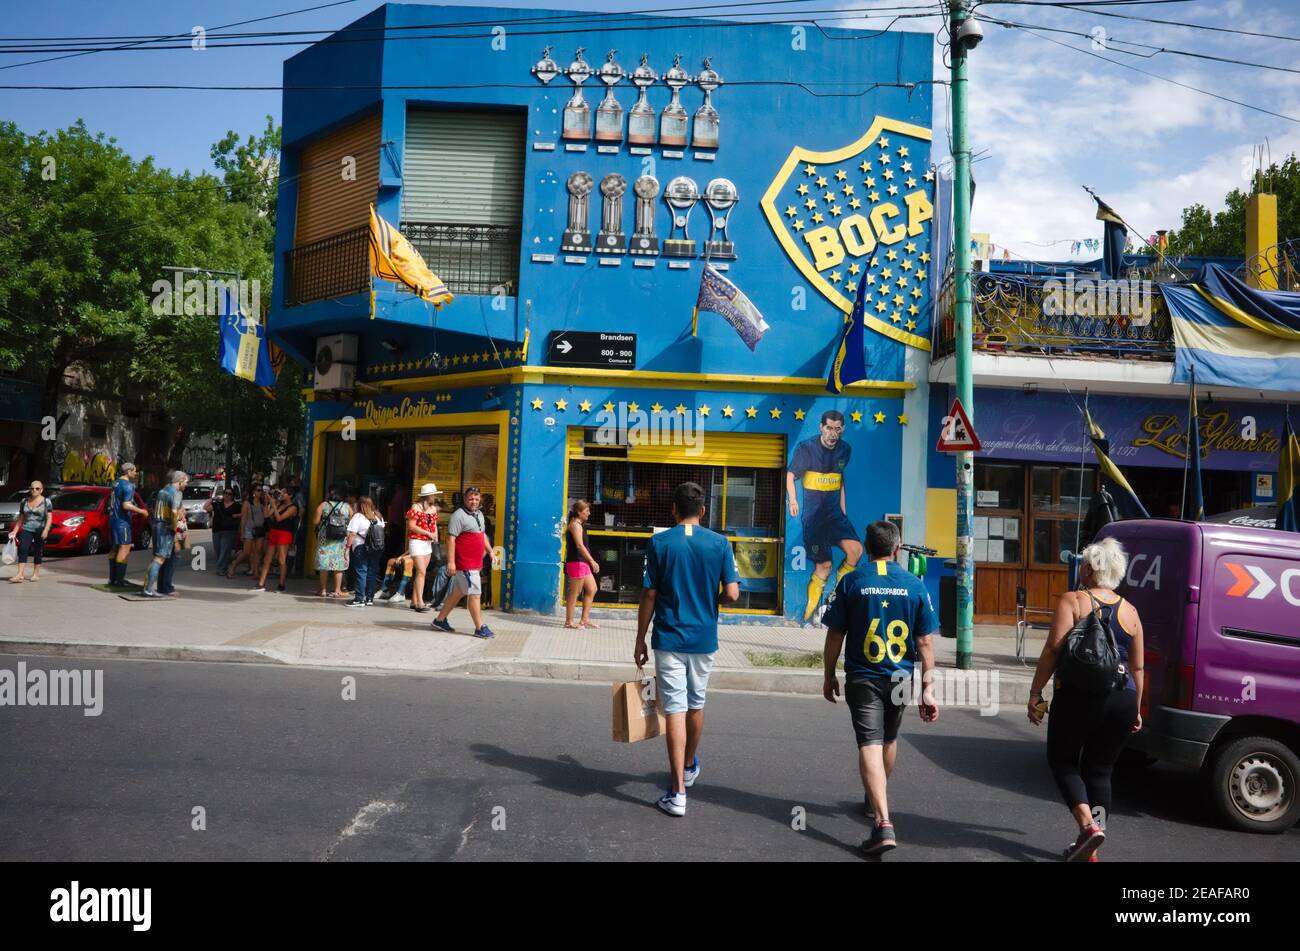 Buenos Aires, Argentina - January, 2020: Football fans of Boca Juniors club crossing road near La Bombonera stadium and fan shop in front of it Stock Photo